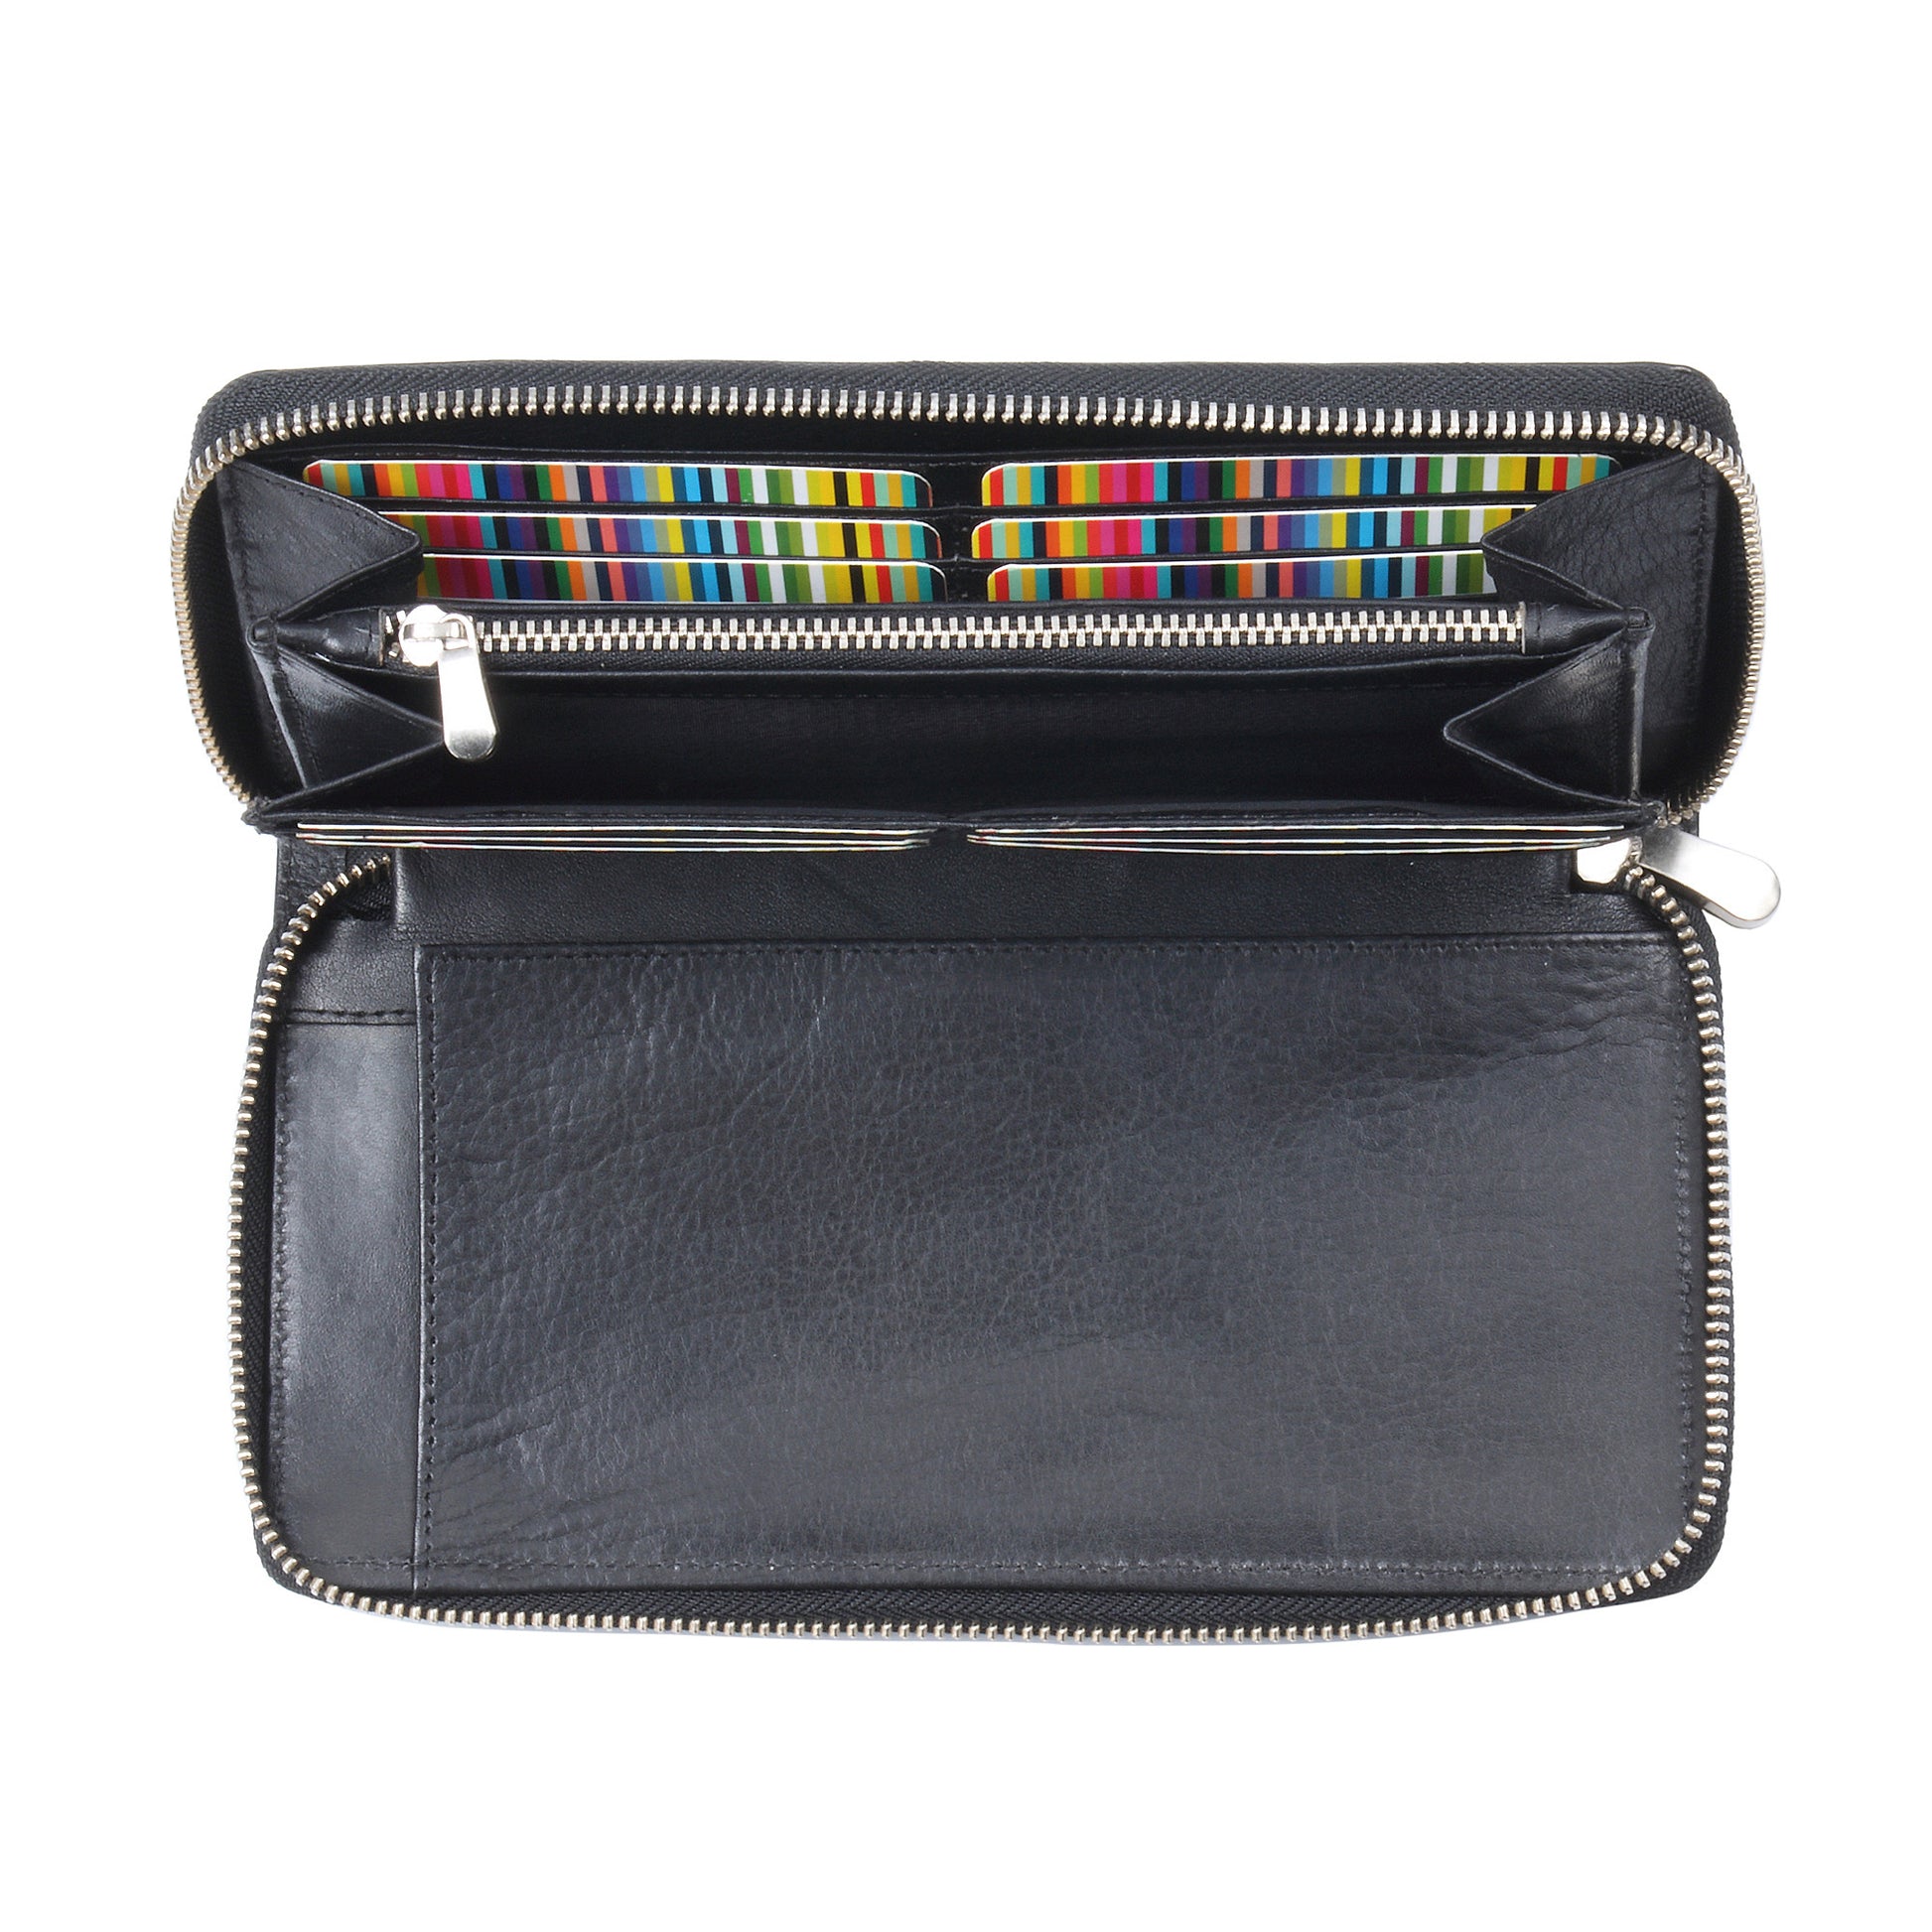 Style n Craft 301900-BL Zippered Travel Organizer in Black Leather - front open 2